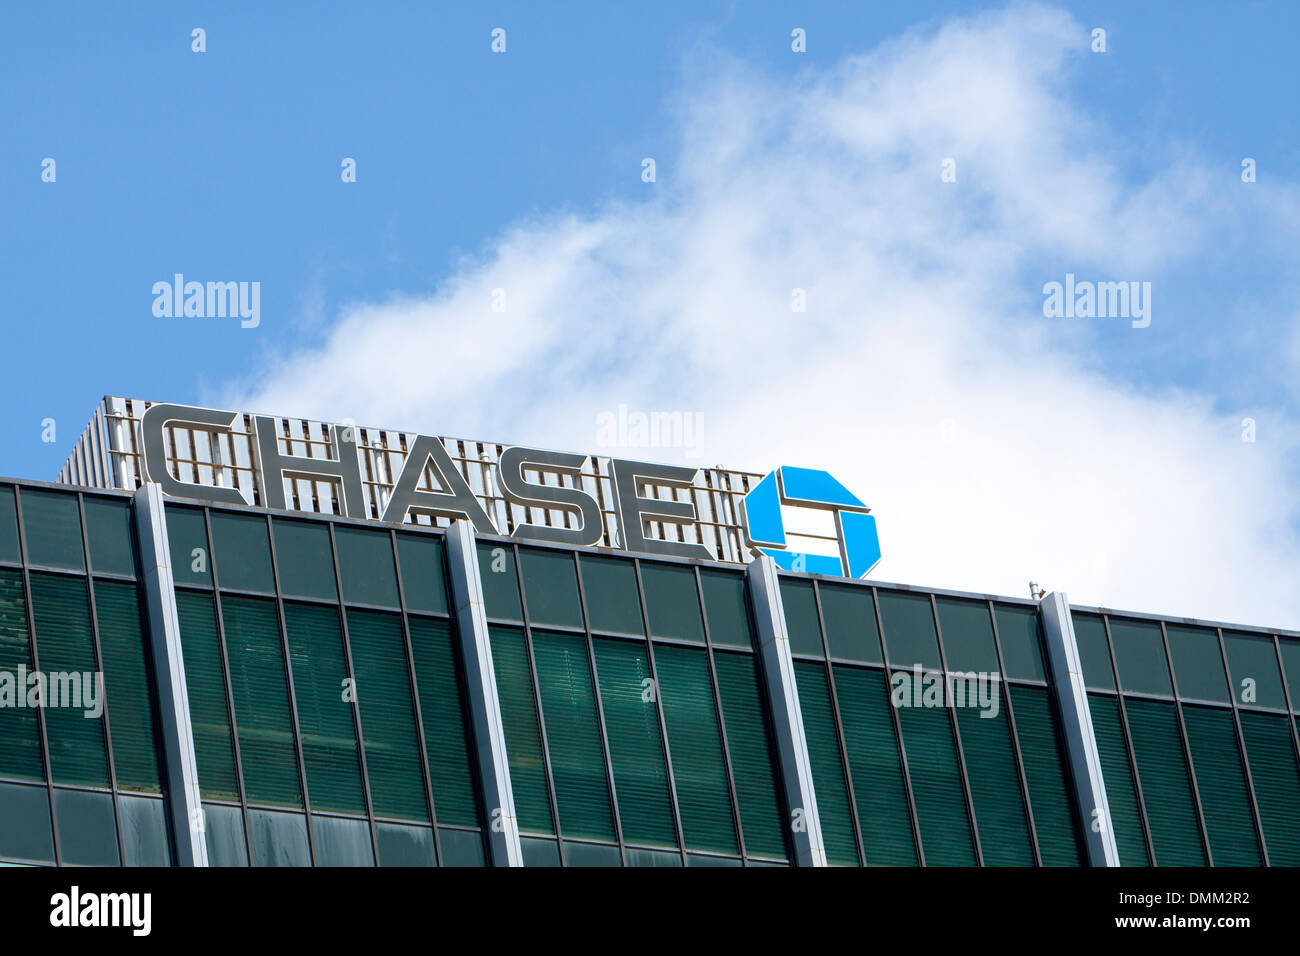 The top of the Chase bank building in Columbus, Ohio, USA. Stock Photo